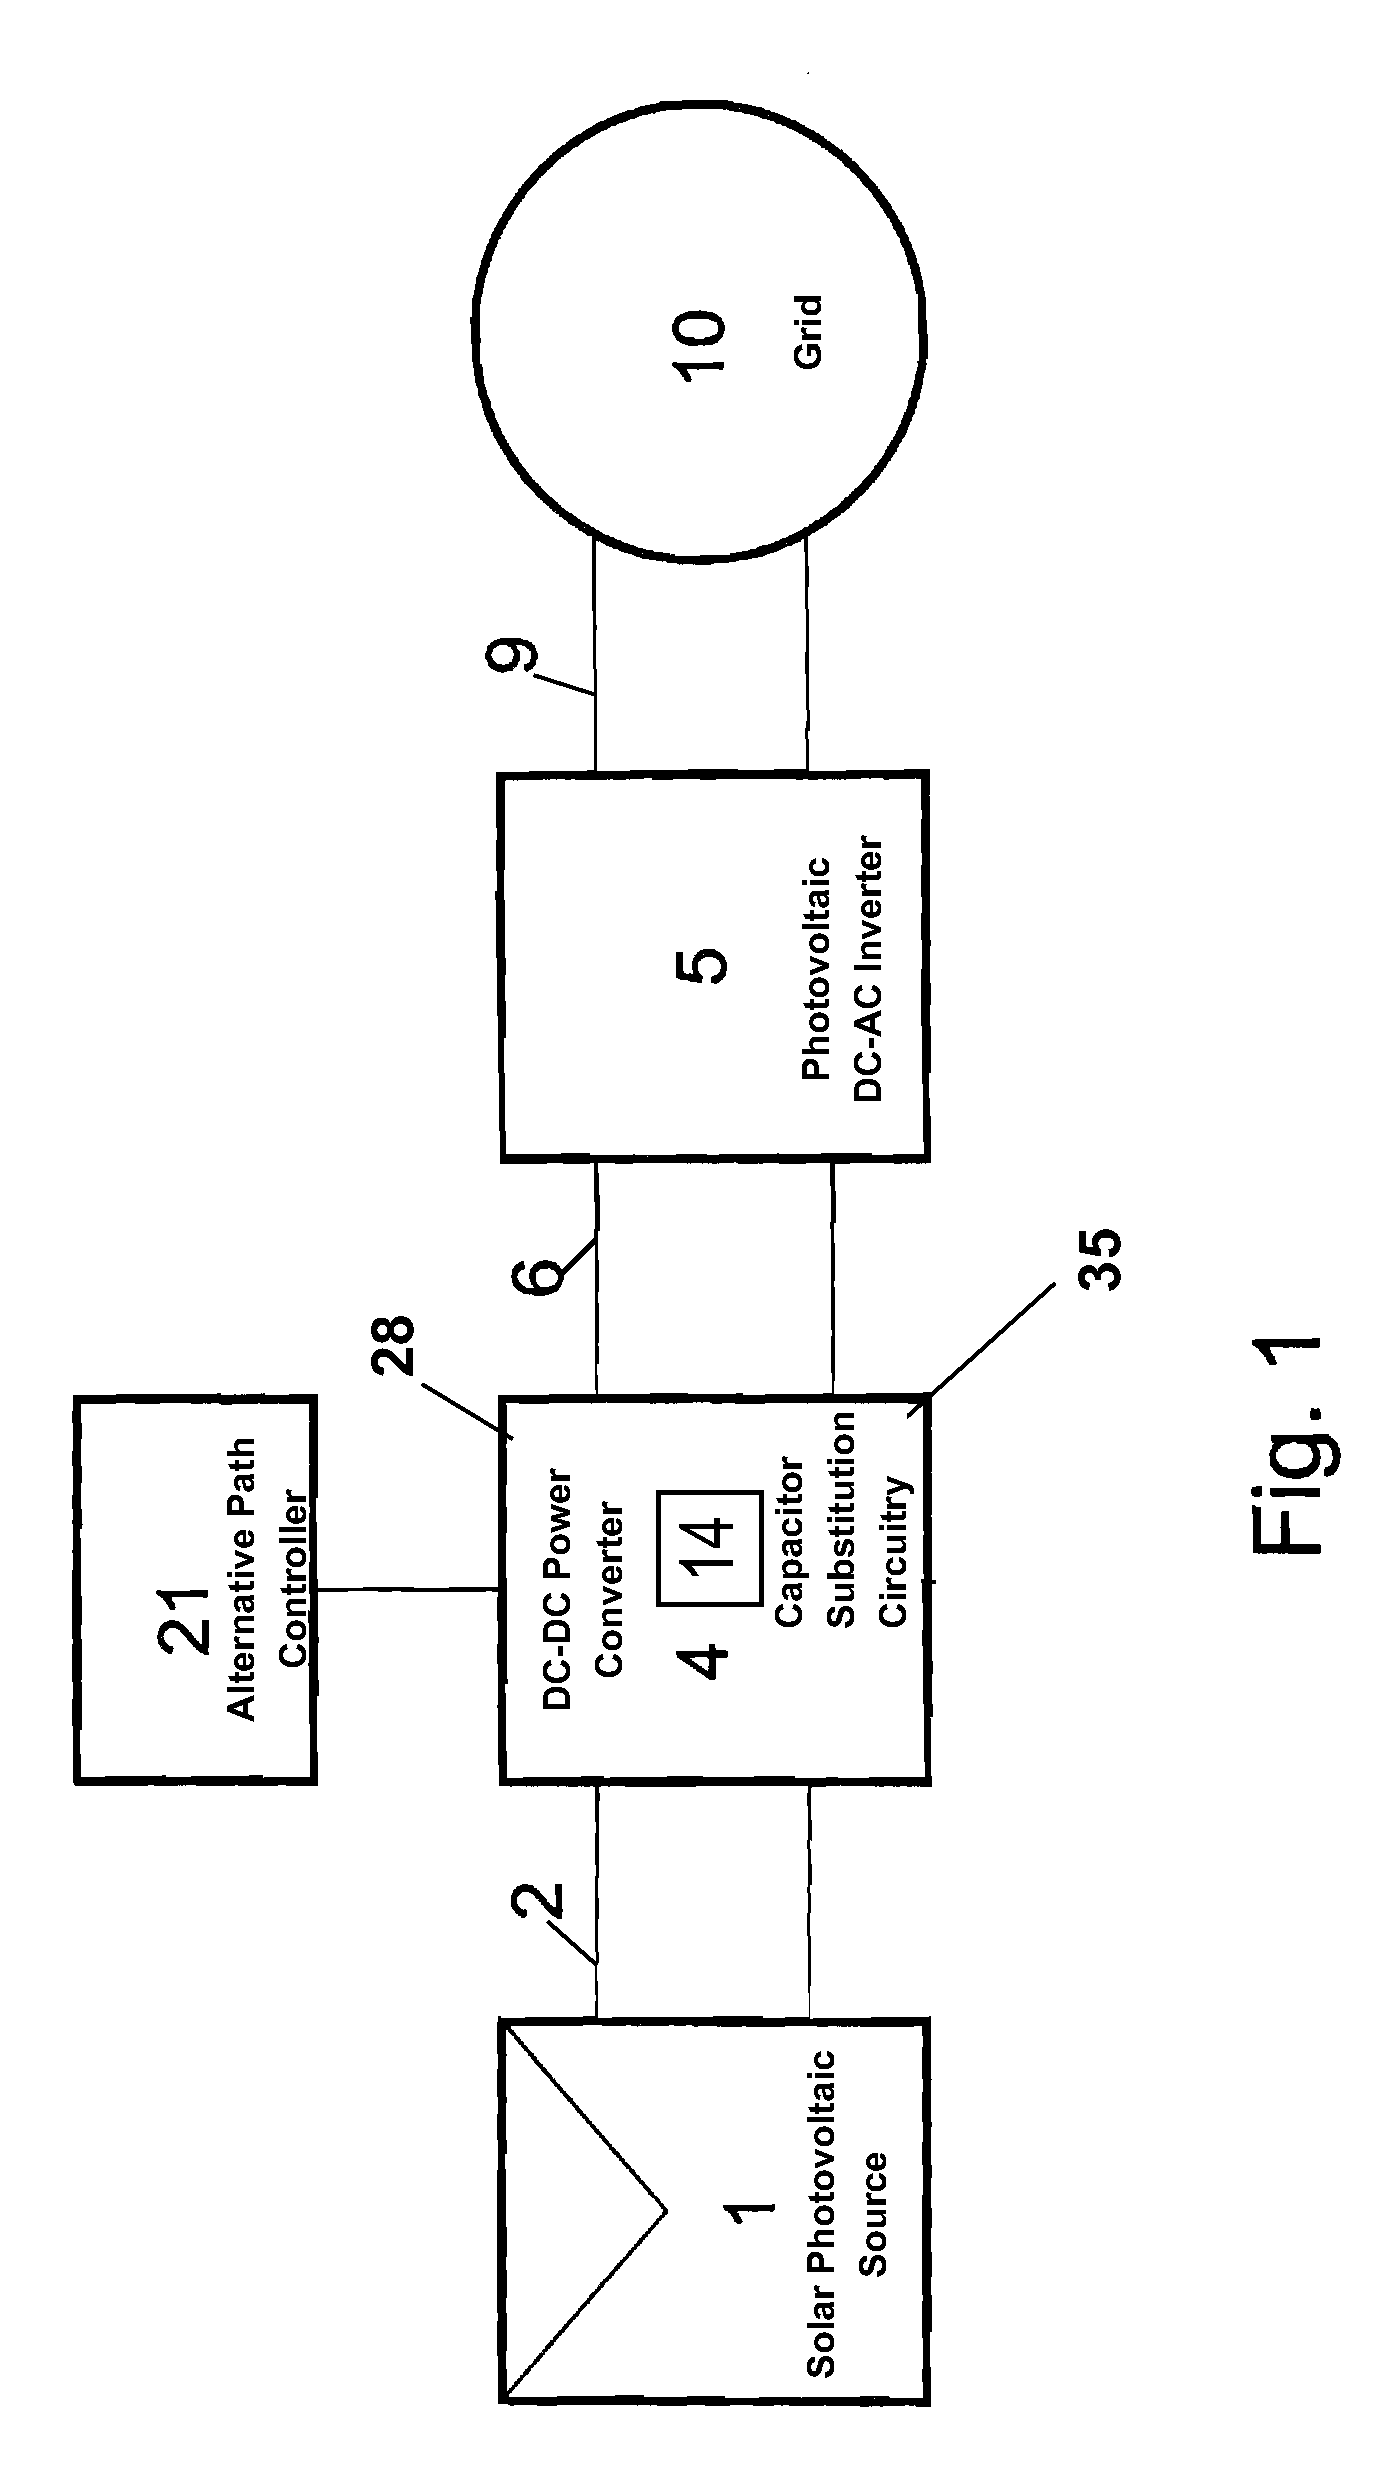 Solar power capacitor alternative switch circuitry system for enhanced capacitor life